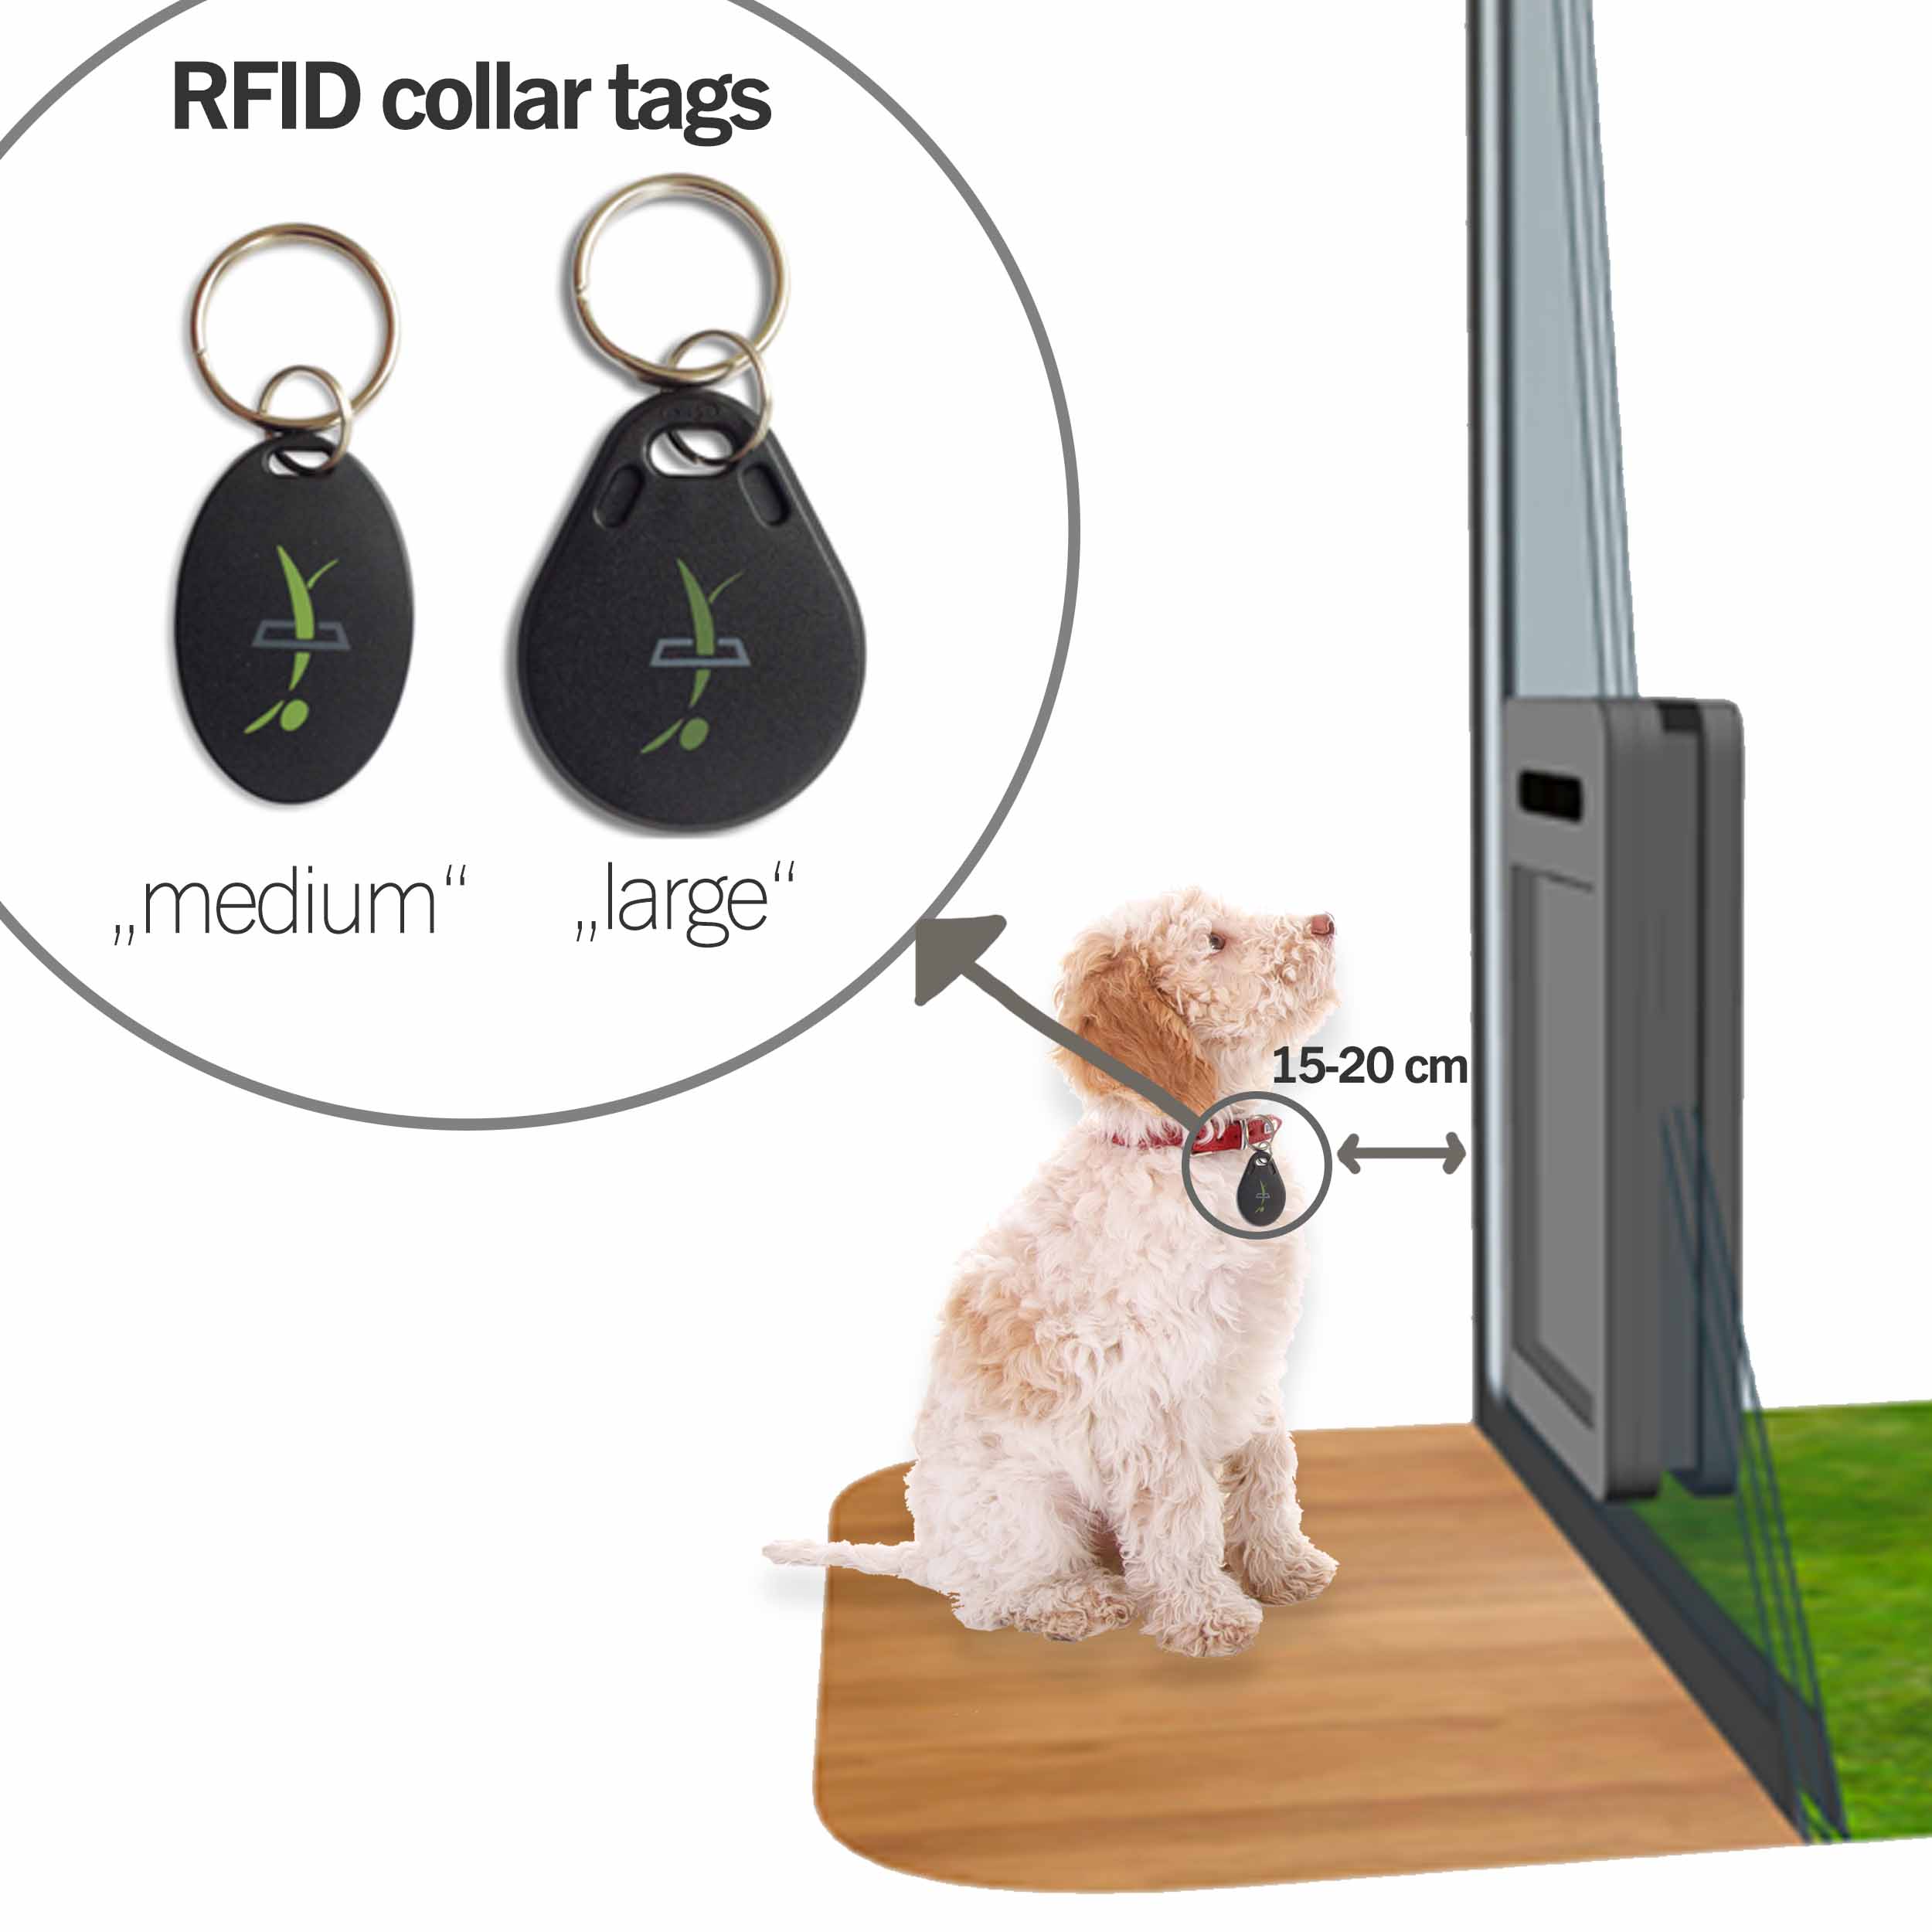 The new freedom - petWALK - Doors for Pets